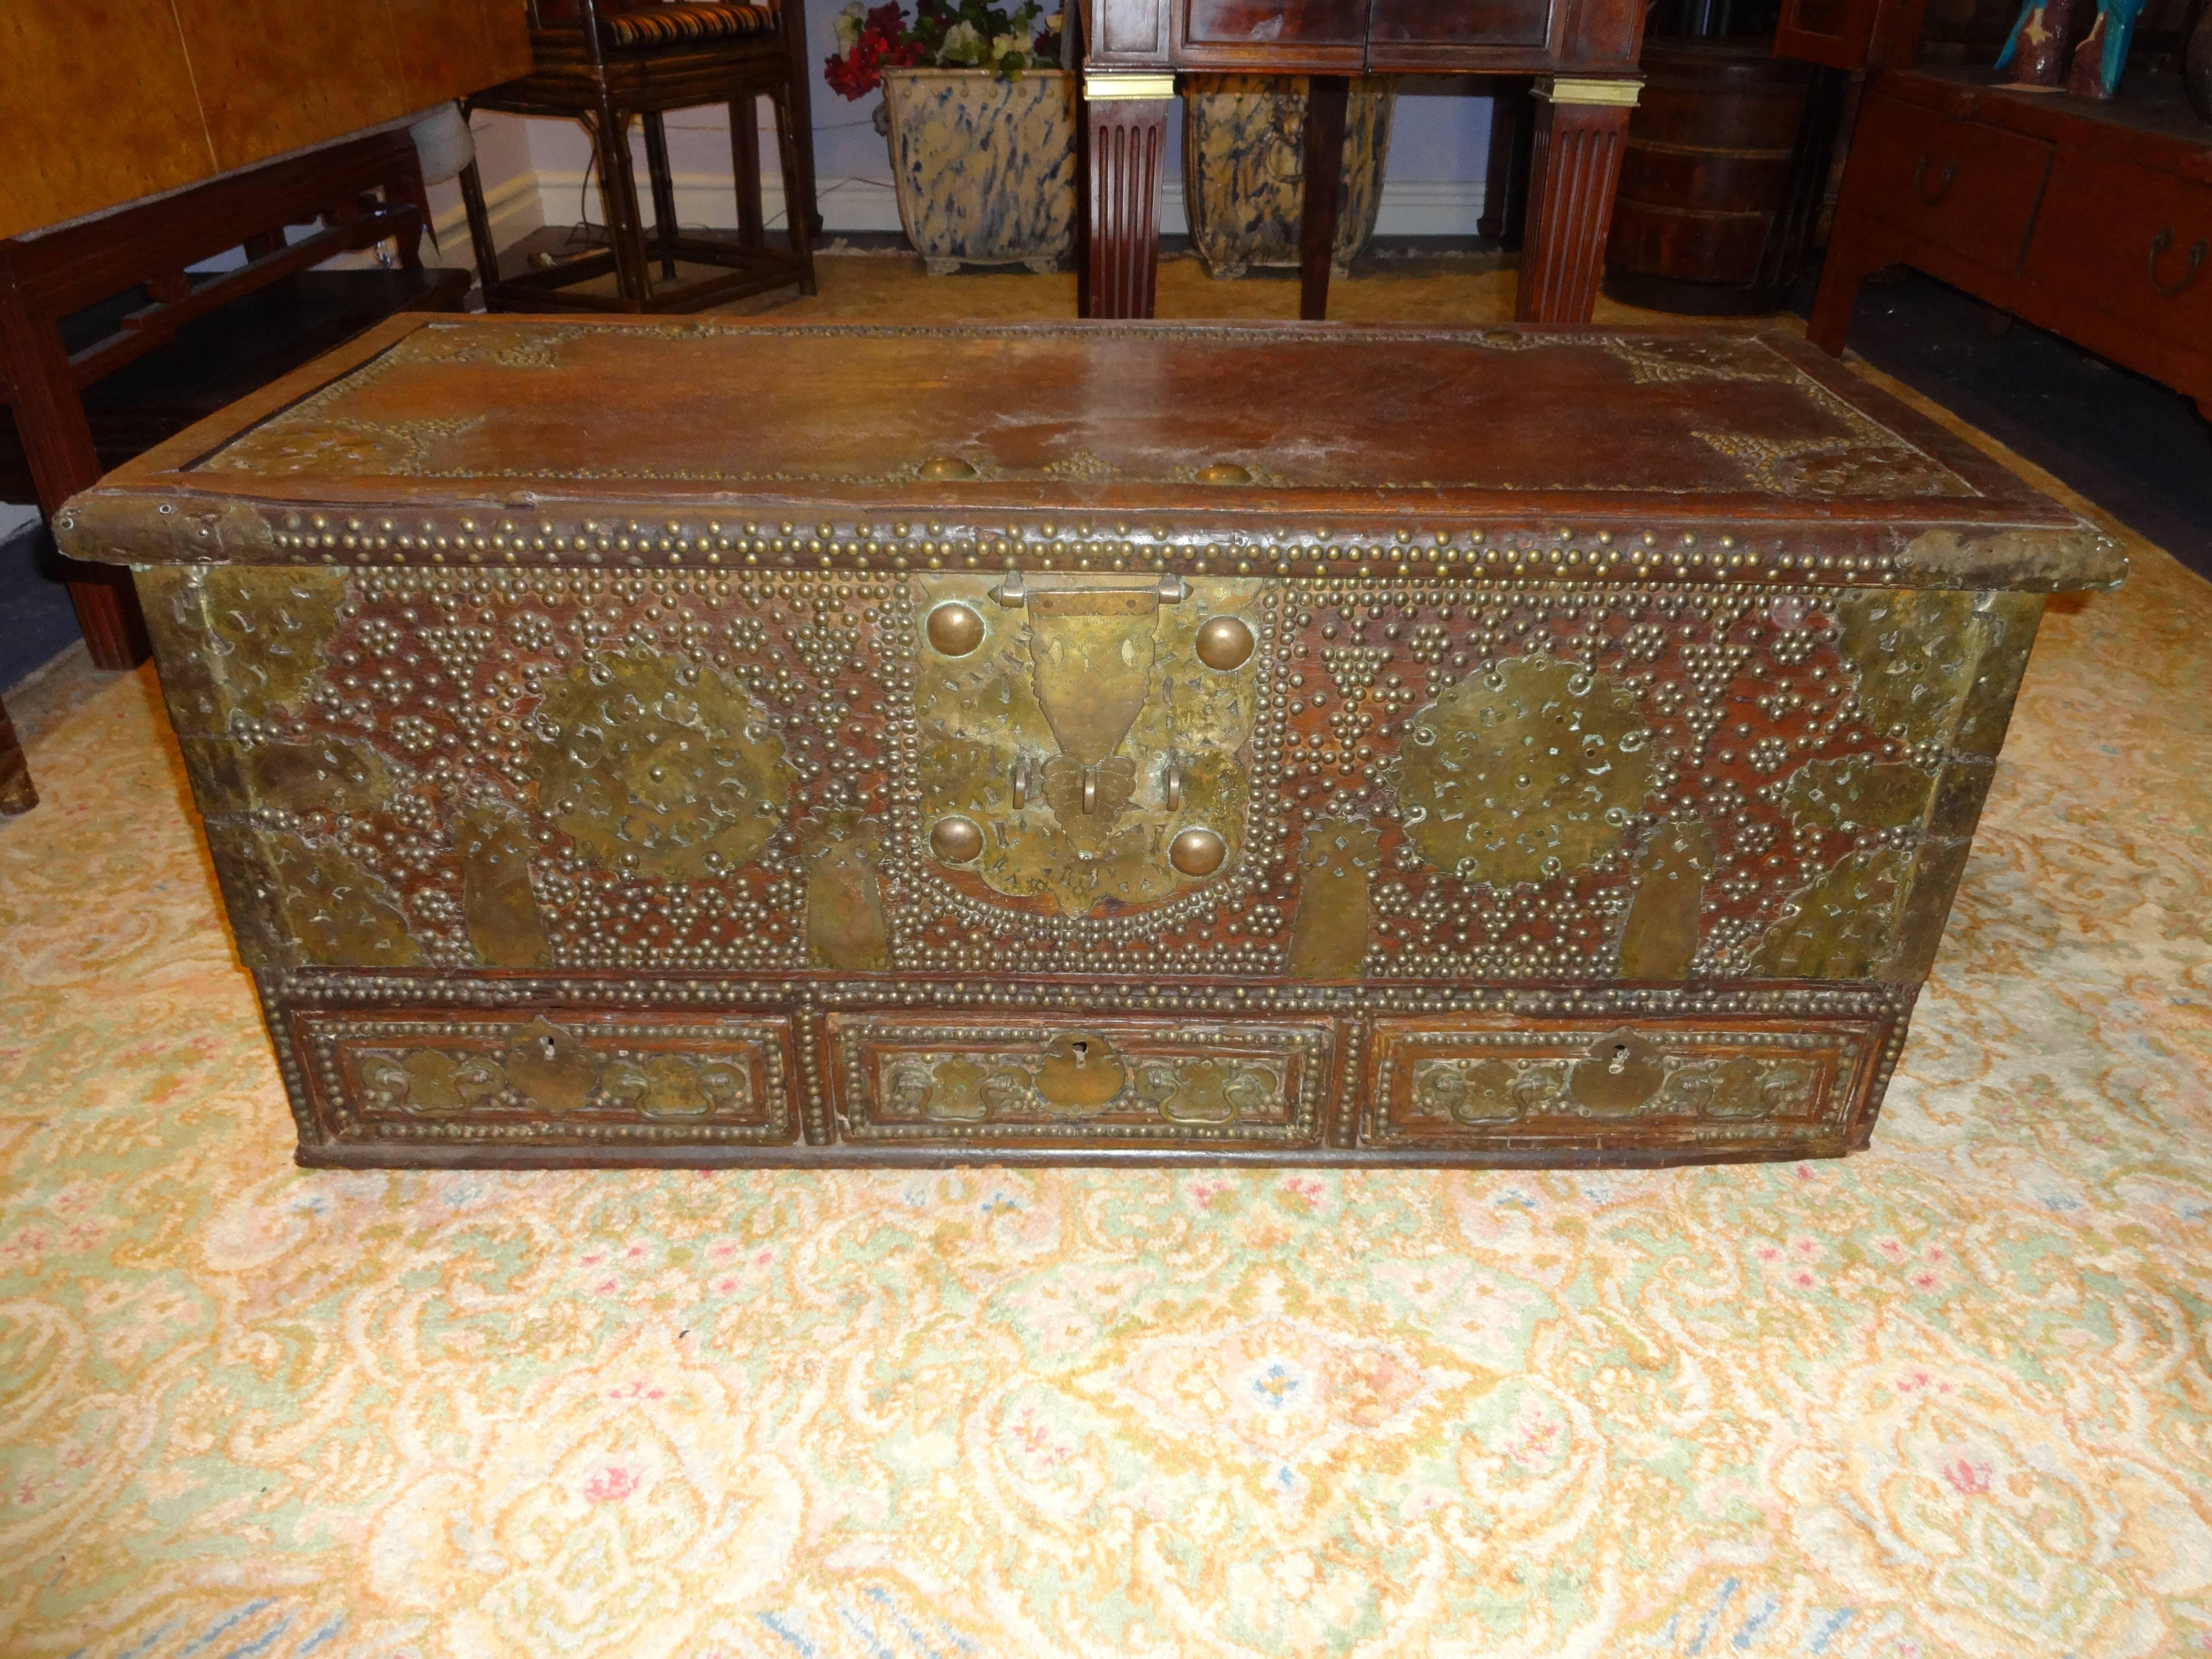 A wonderful Kuwaiti wooden top opening storage chest adorned with brass hinges, handles and embellishments with three drawers at the bottom.